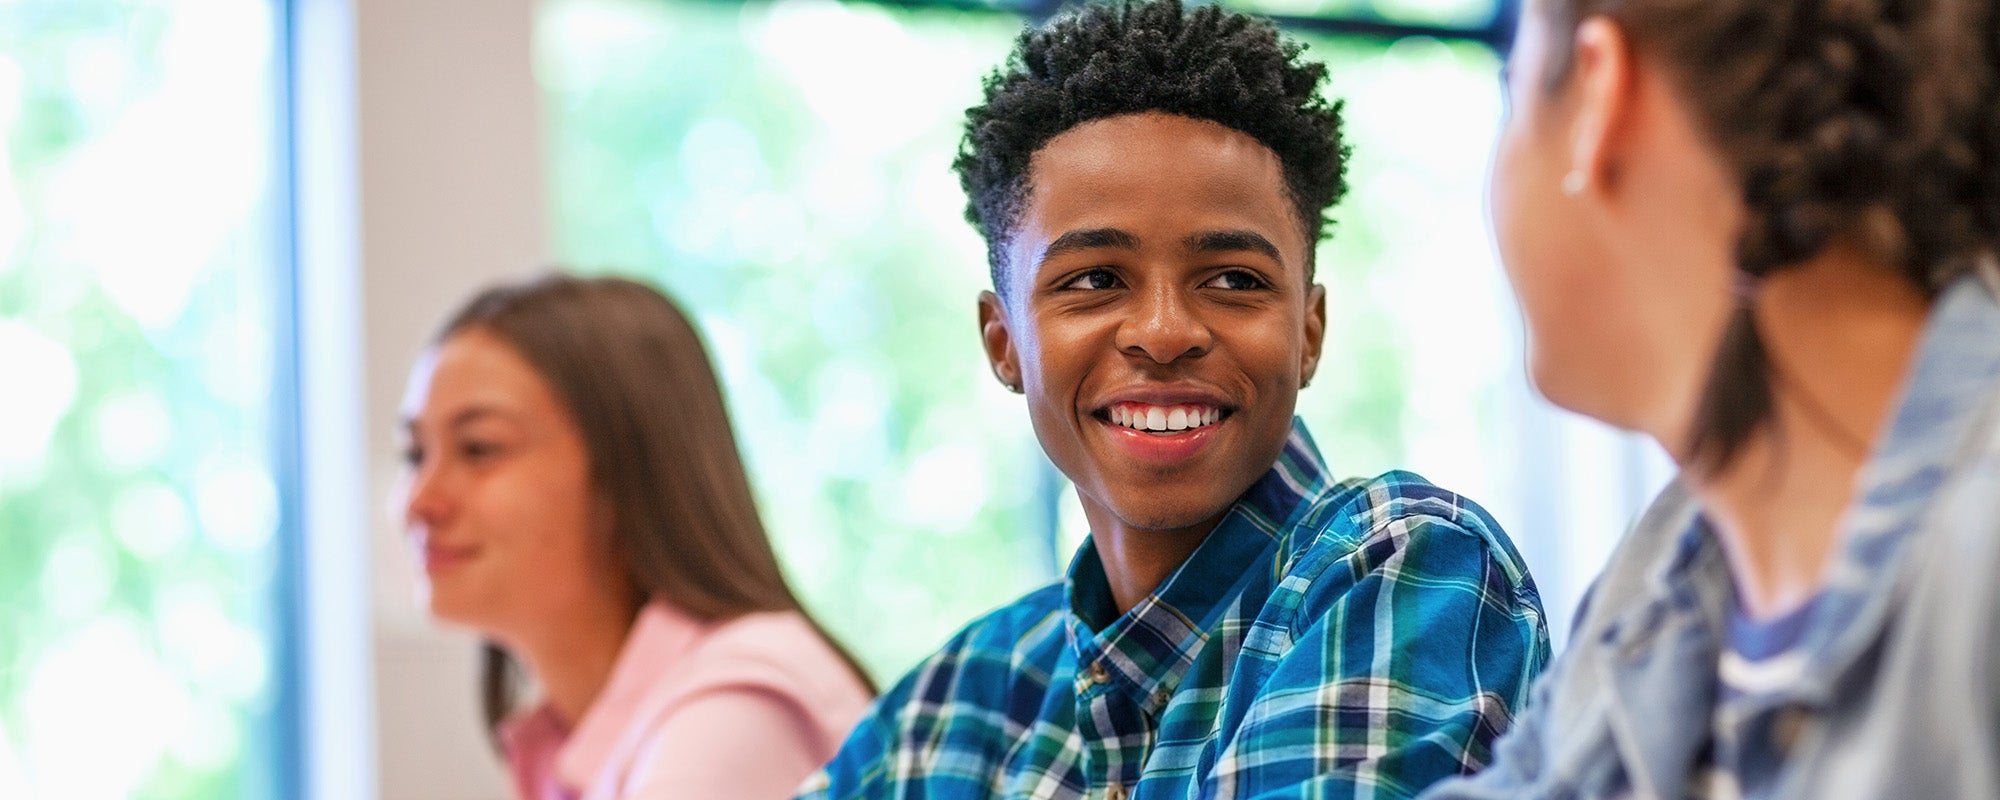 photo of a student in a classroom, wearing a plaid blue shirt and smiling at a girl sitting next to him